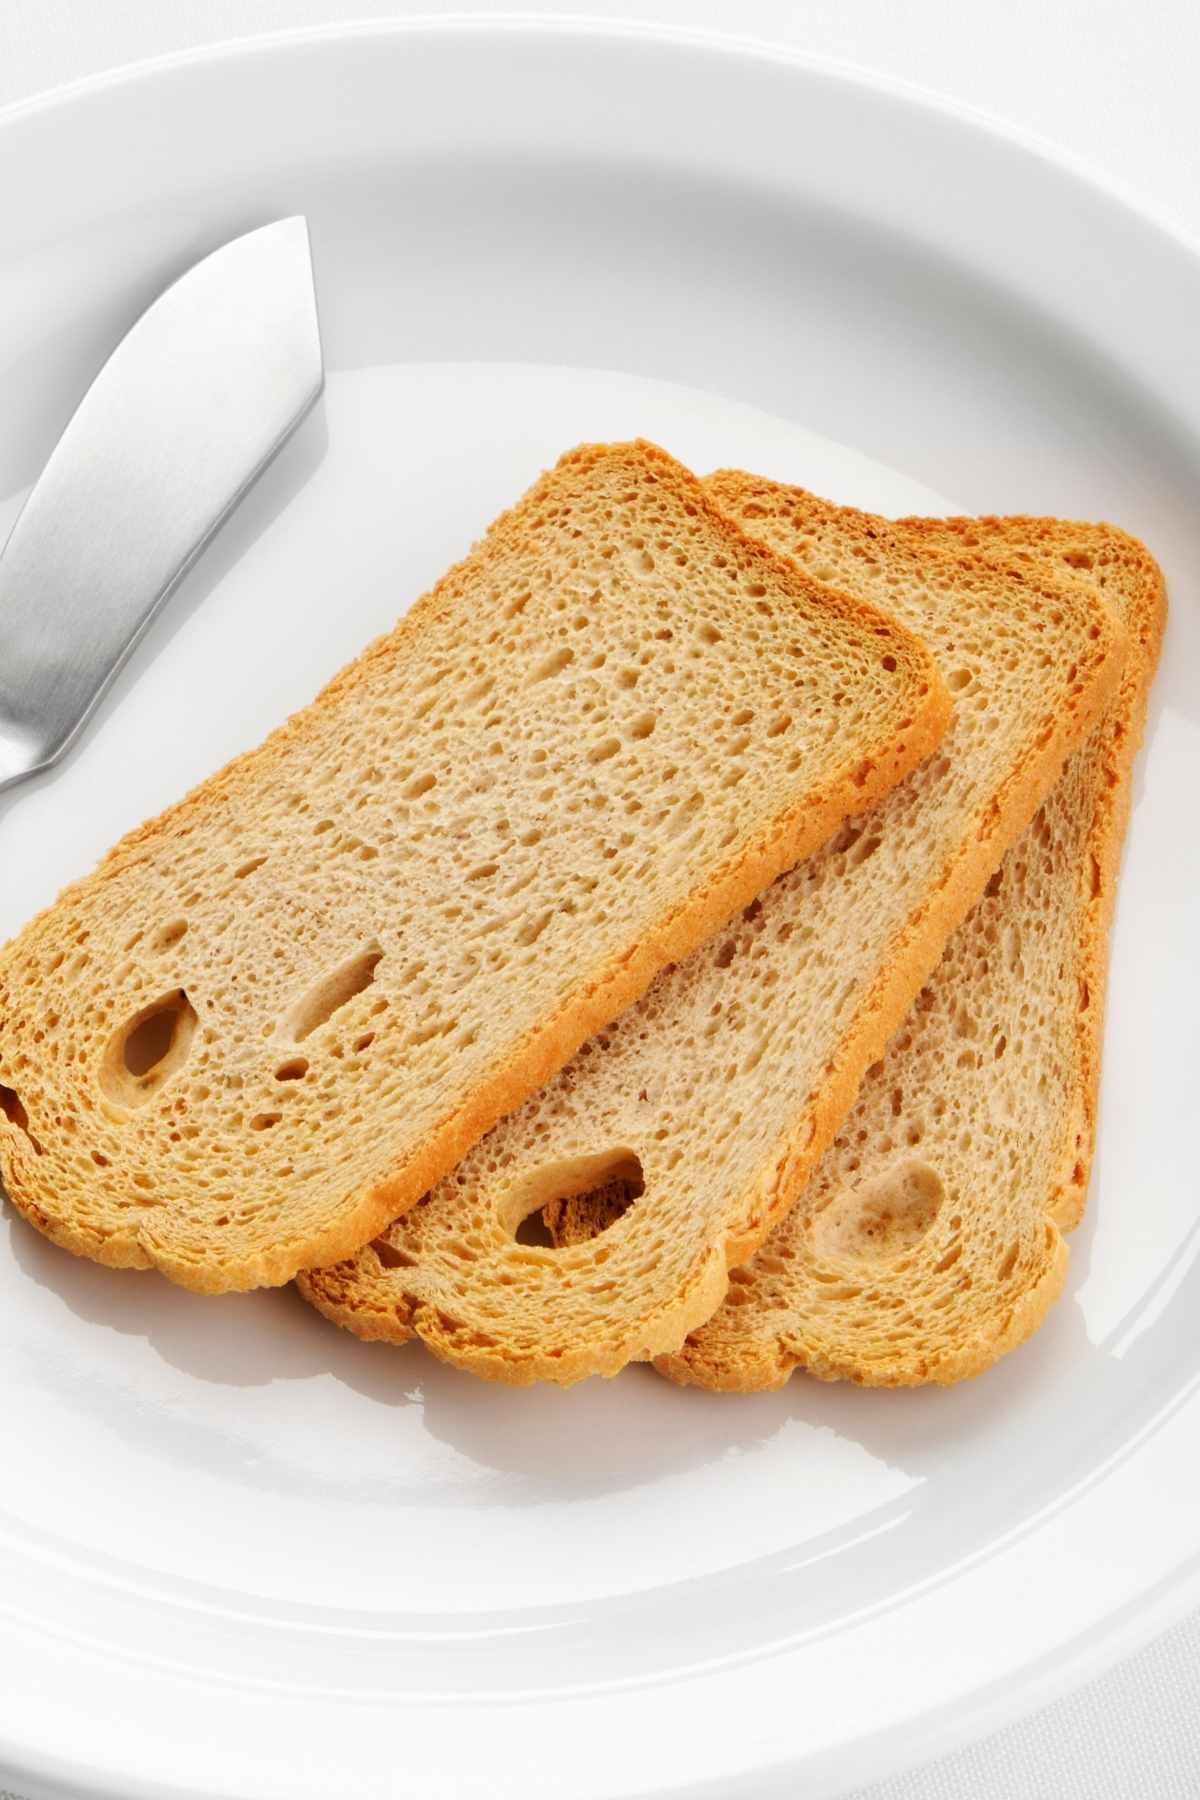 Melba toast is a delicious and versatile snack that can be prepared in less than an hour. You’ll be amazed at how easy it is to make and how many uses it has in the kitchen!